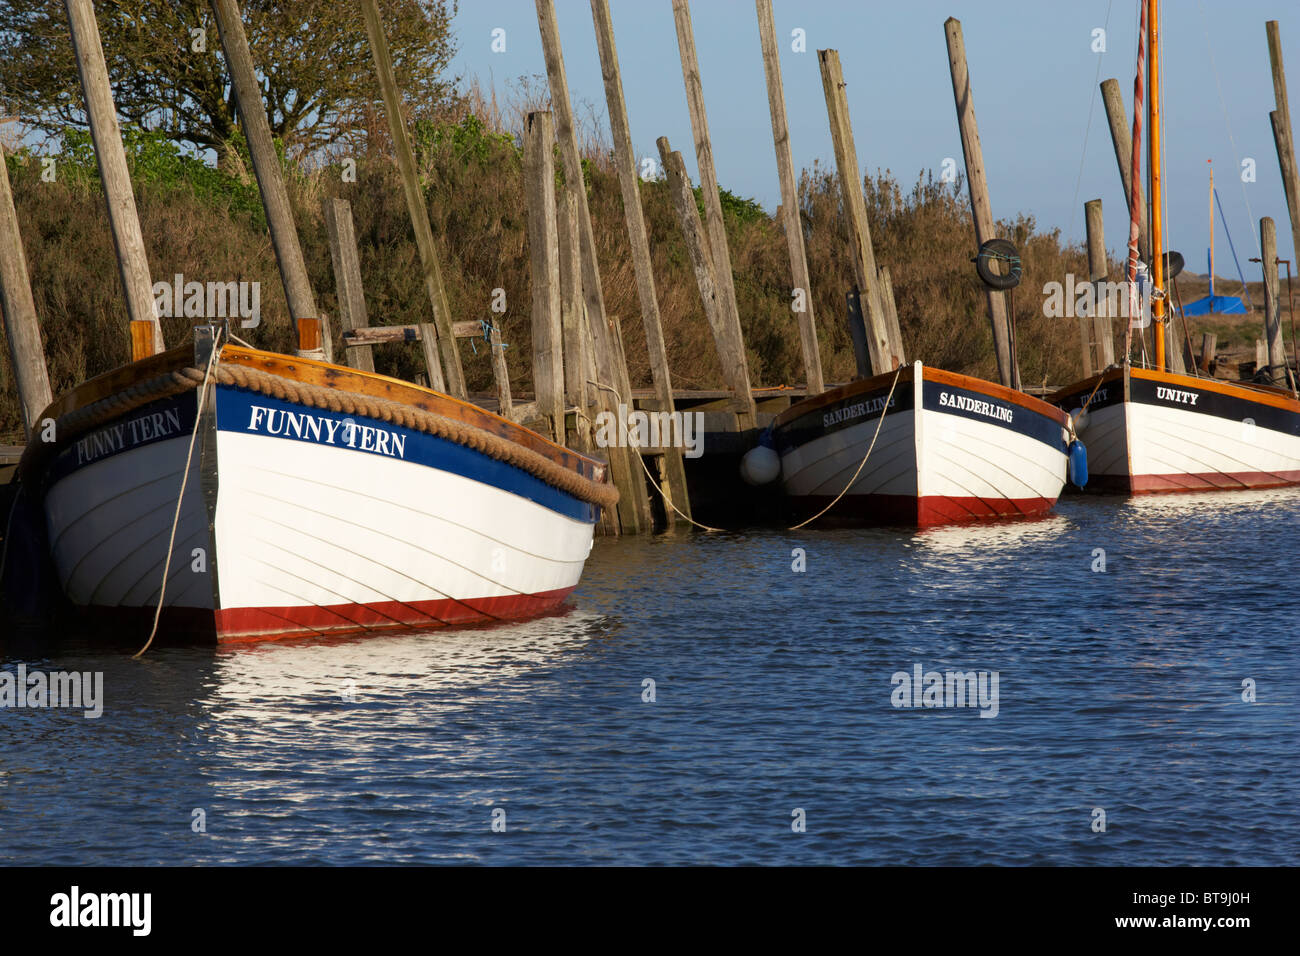 Blakeney on the North Norfolk Coast showing moored and stored boats Stock Photo